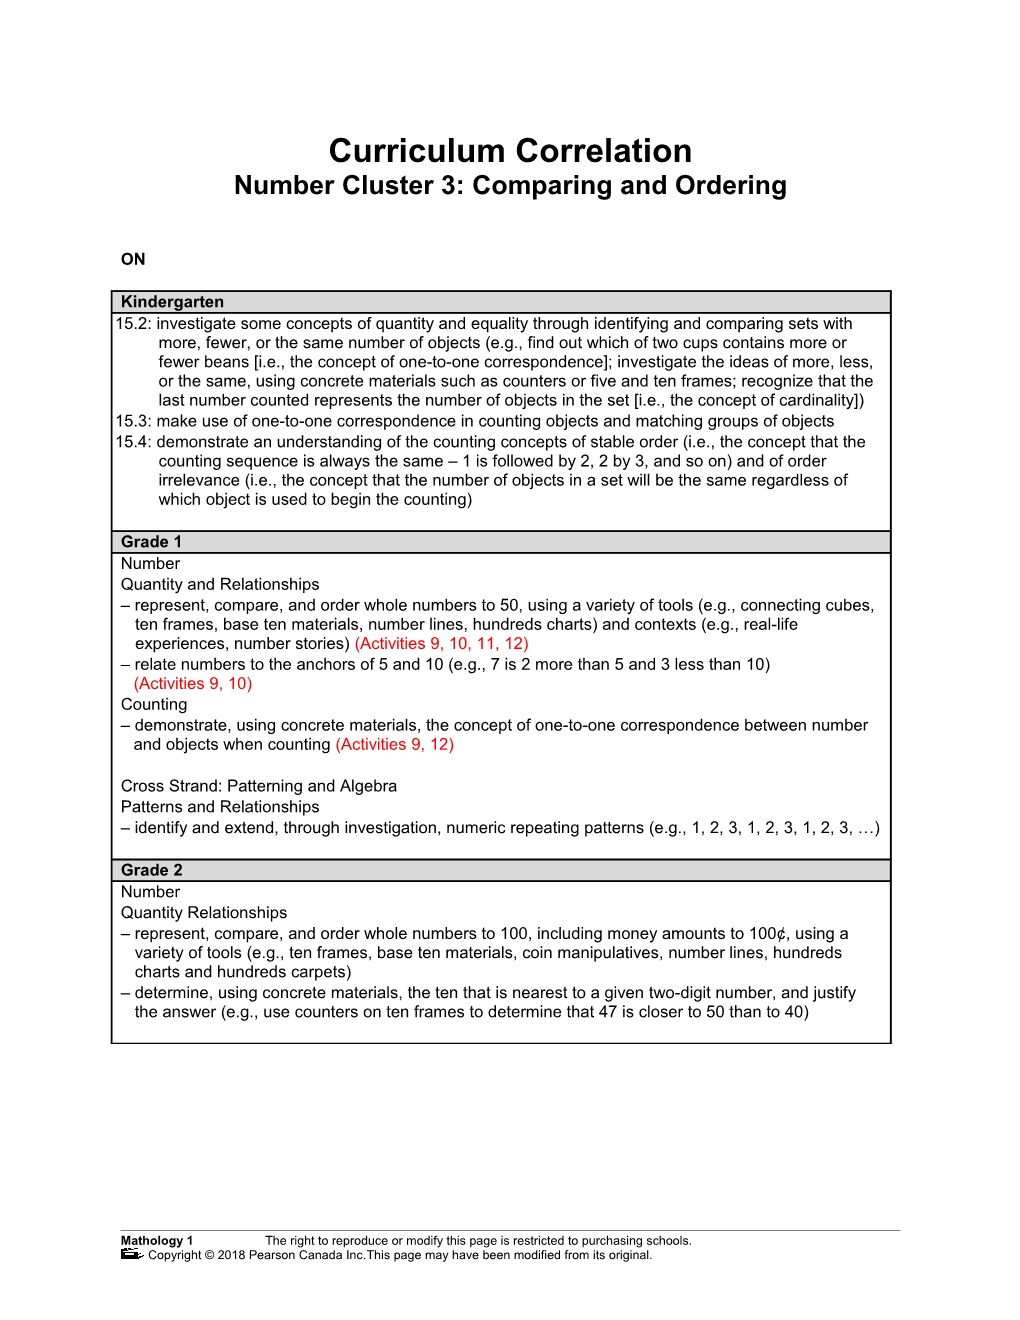 Number Cluster 3: Comparing and Ordering